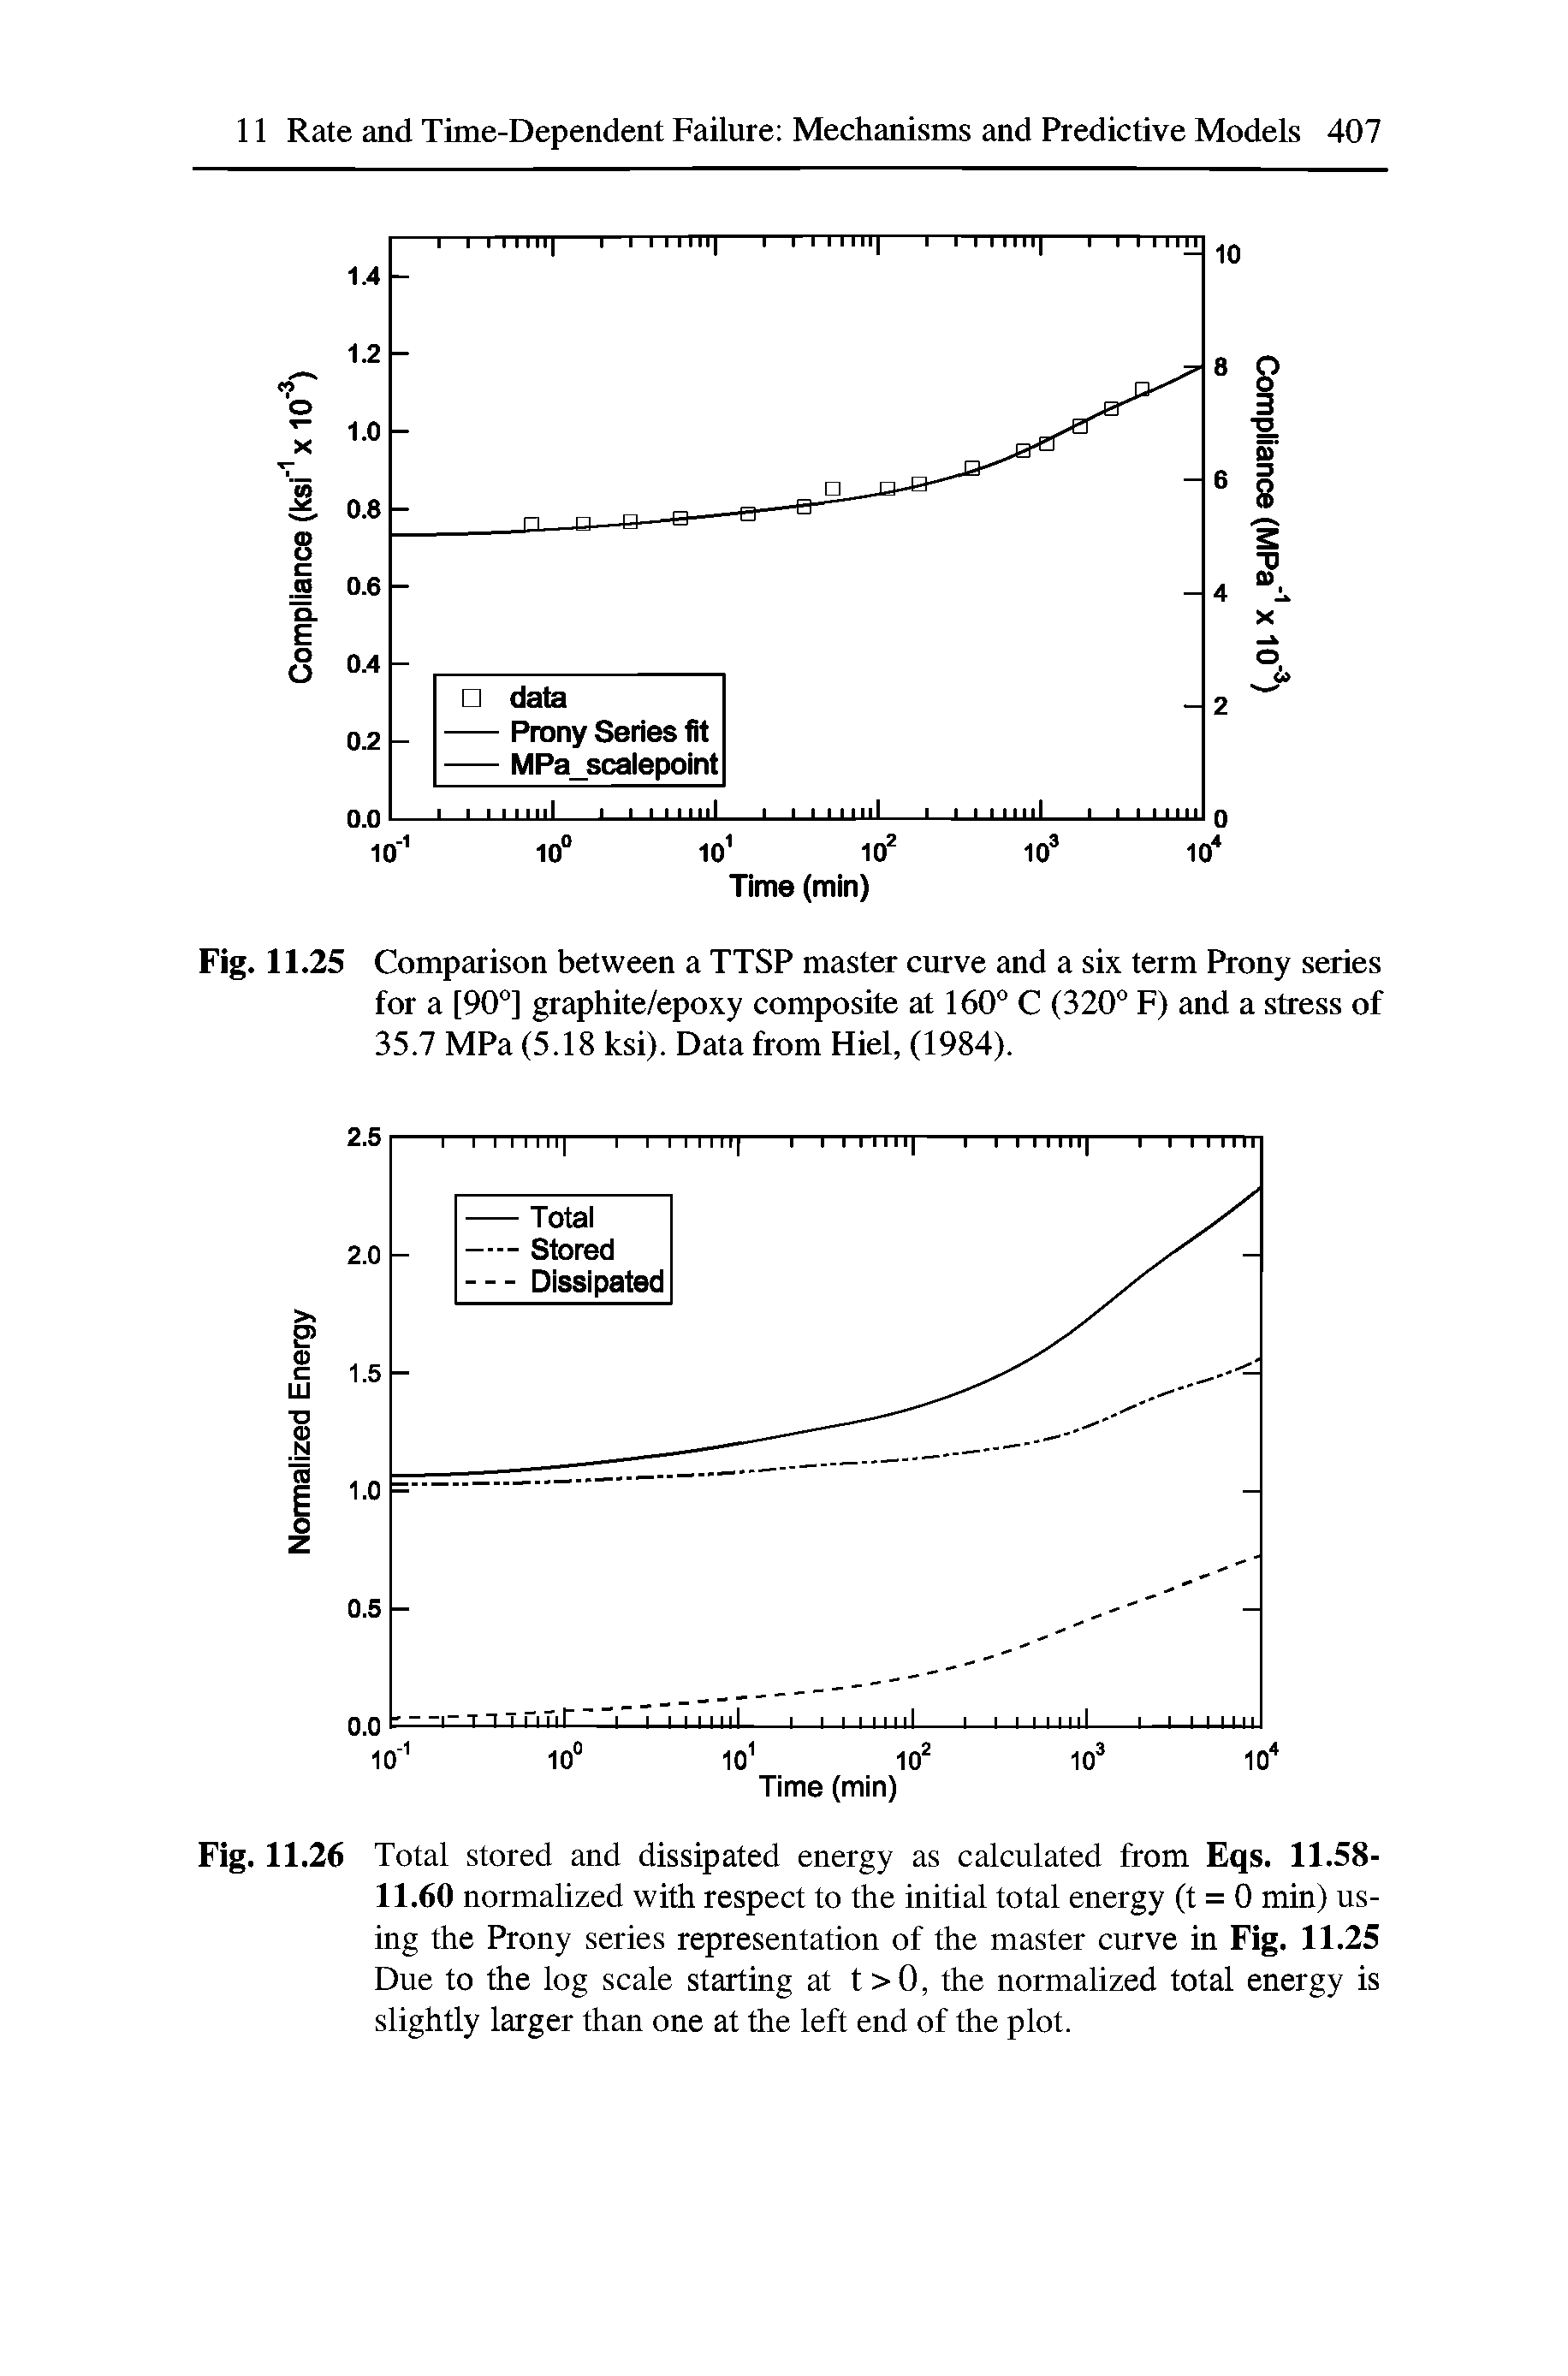 Fig. 11. 25 Comparison between a TTSP master curve and a six term Prony series for a [90°] graphite/epoxy composite at 160° C (320° F) and a stress of 35.7 MPa (5.18 ksi). Data from Hiel, (1984).